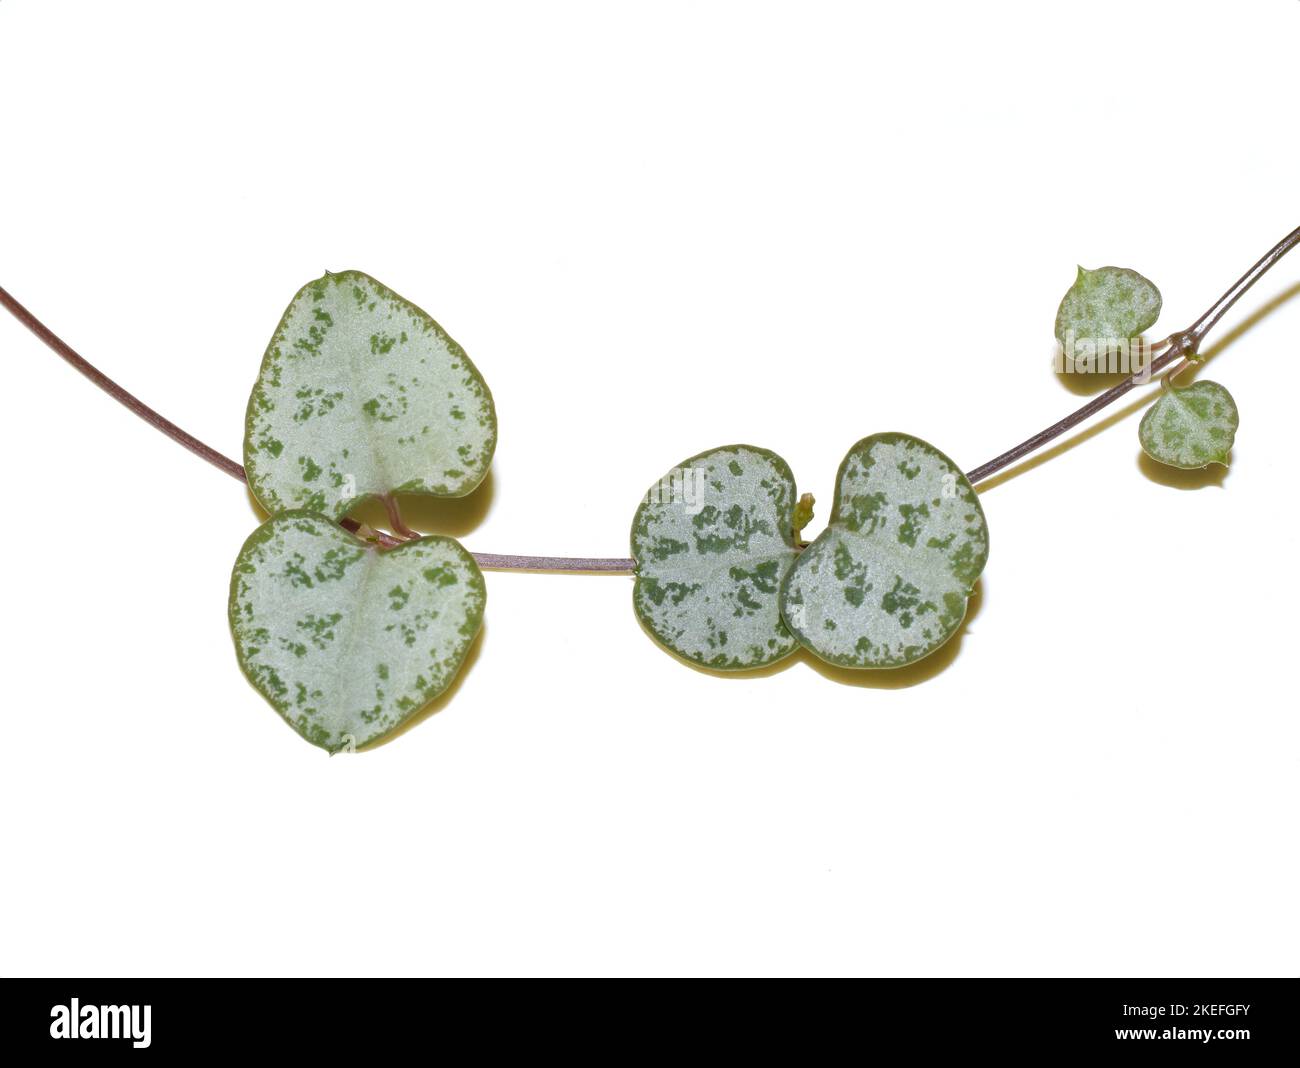 The heartshaped leaf of a ceropegia wood plant on white background Stock Photo